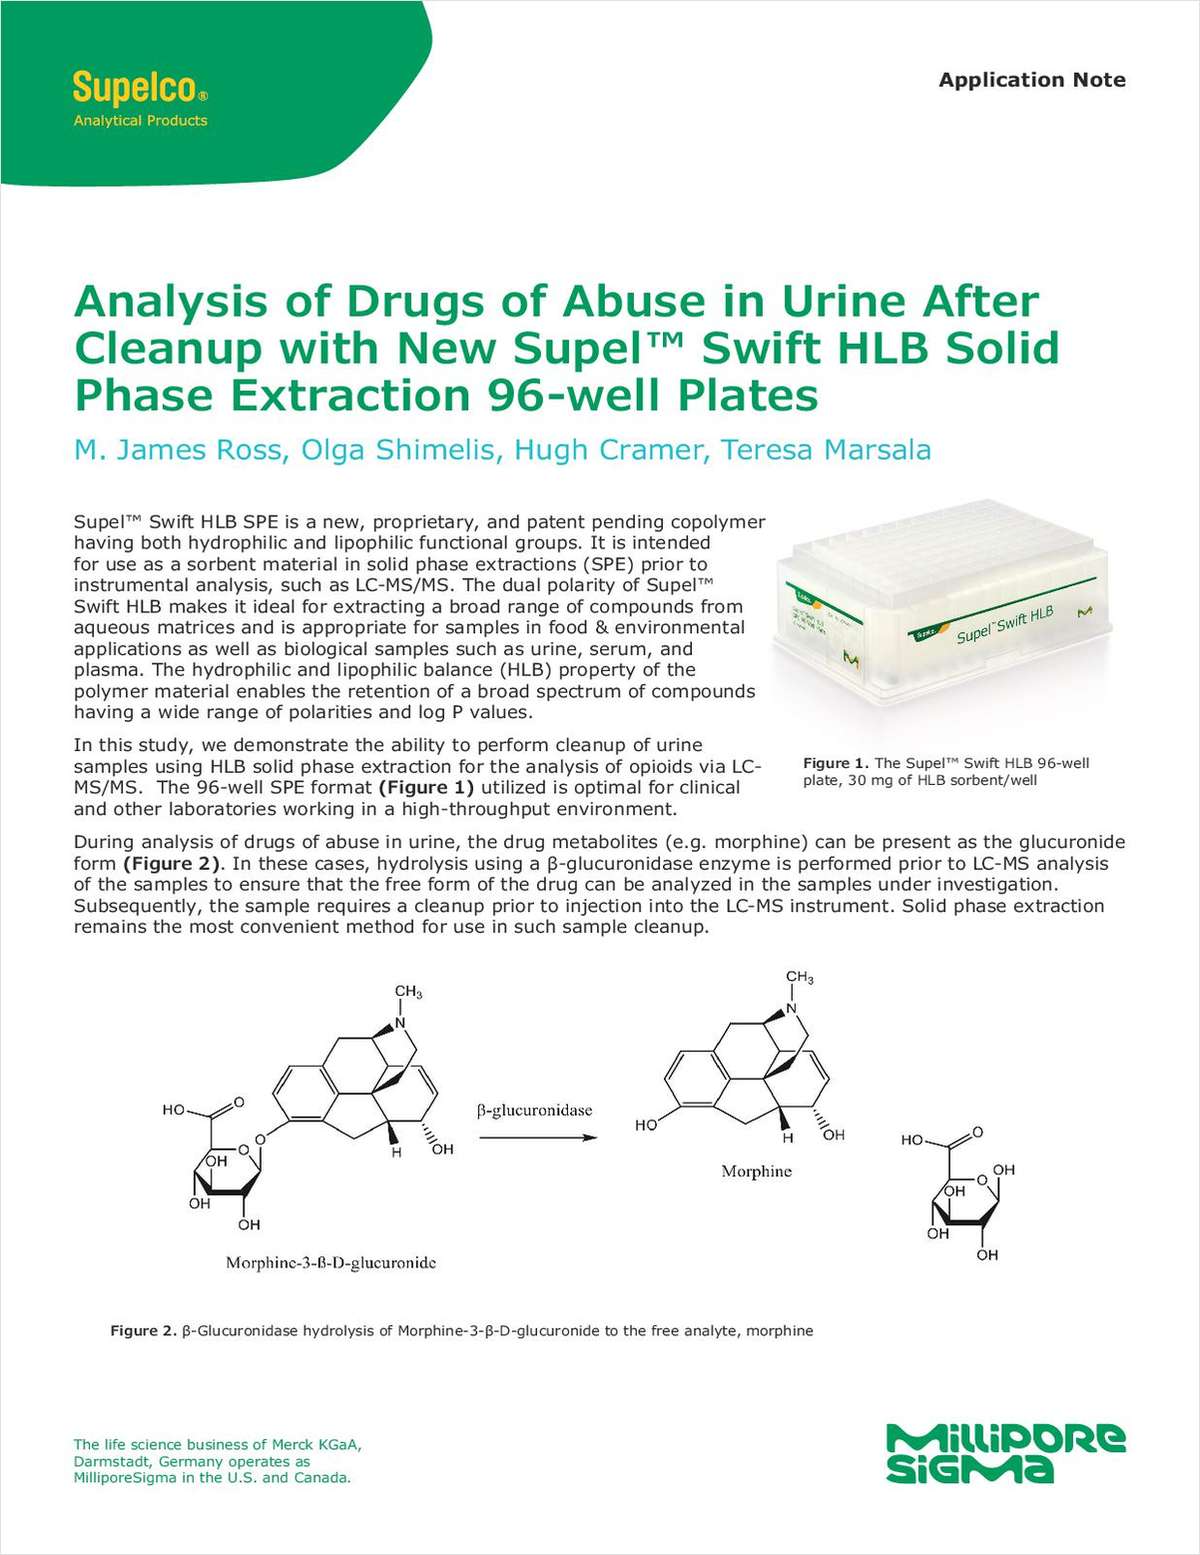 Analysis of Drugs of Abuse in Urine After Cleanup with New Supel Swift HLB Solid Phase Extraction 96-well Plates